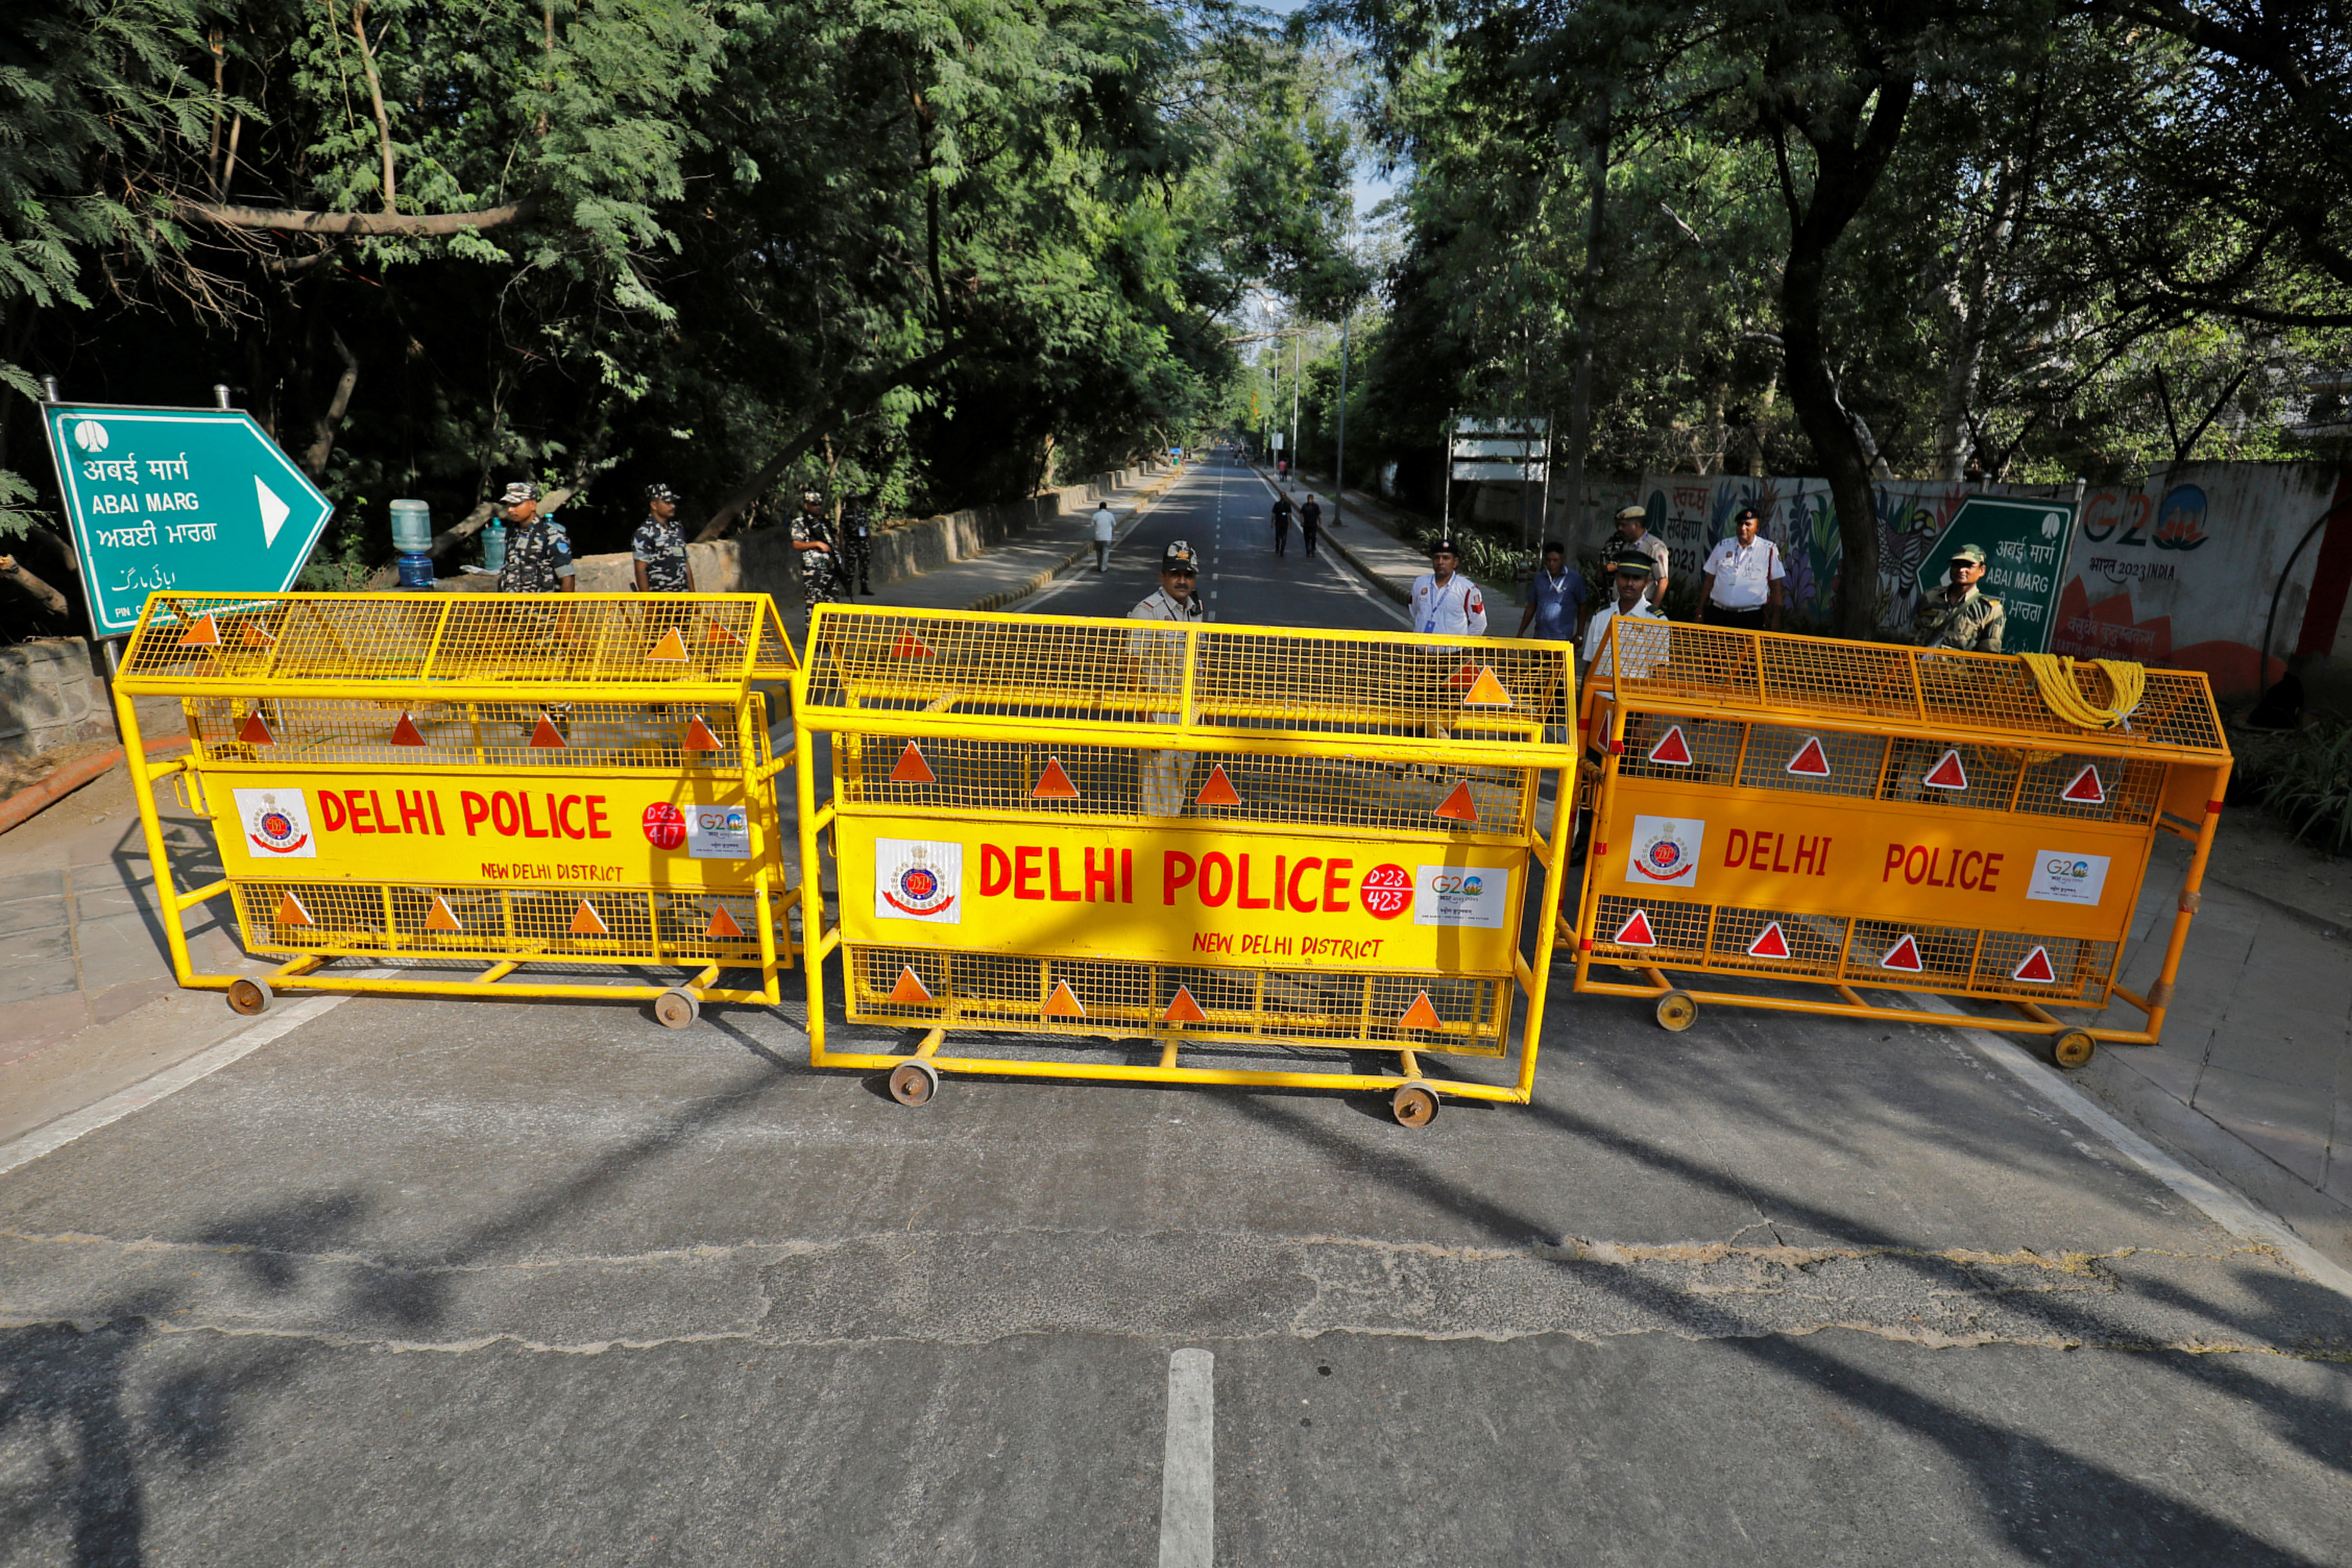 Police officers stand behind barricades on an empty road ahead of the G20 Summit in New Delhi